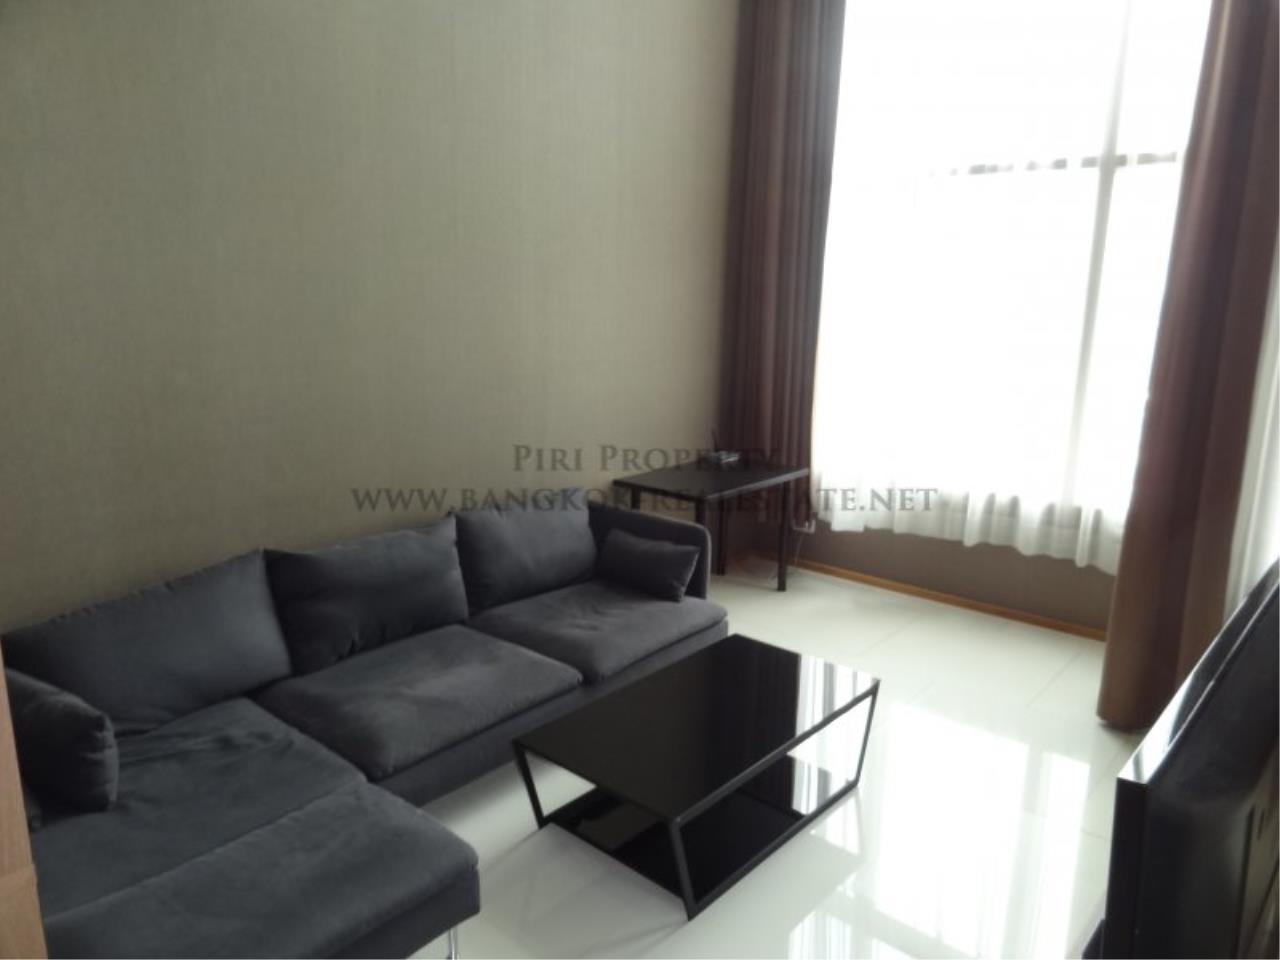 Piri Property Agency's Minimalistic Style - Emporio Duplex Condo for Rent - 1 Bedroom with nice view 4